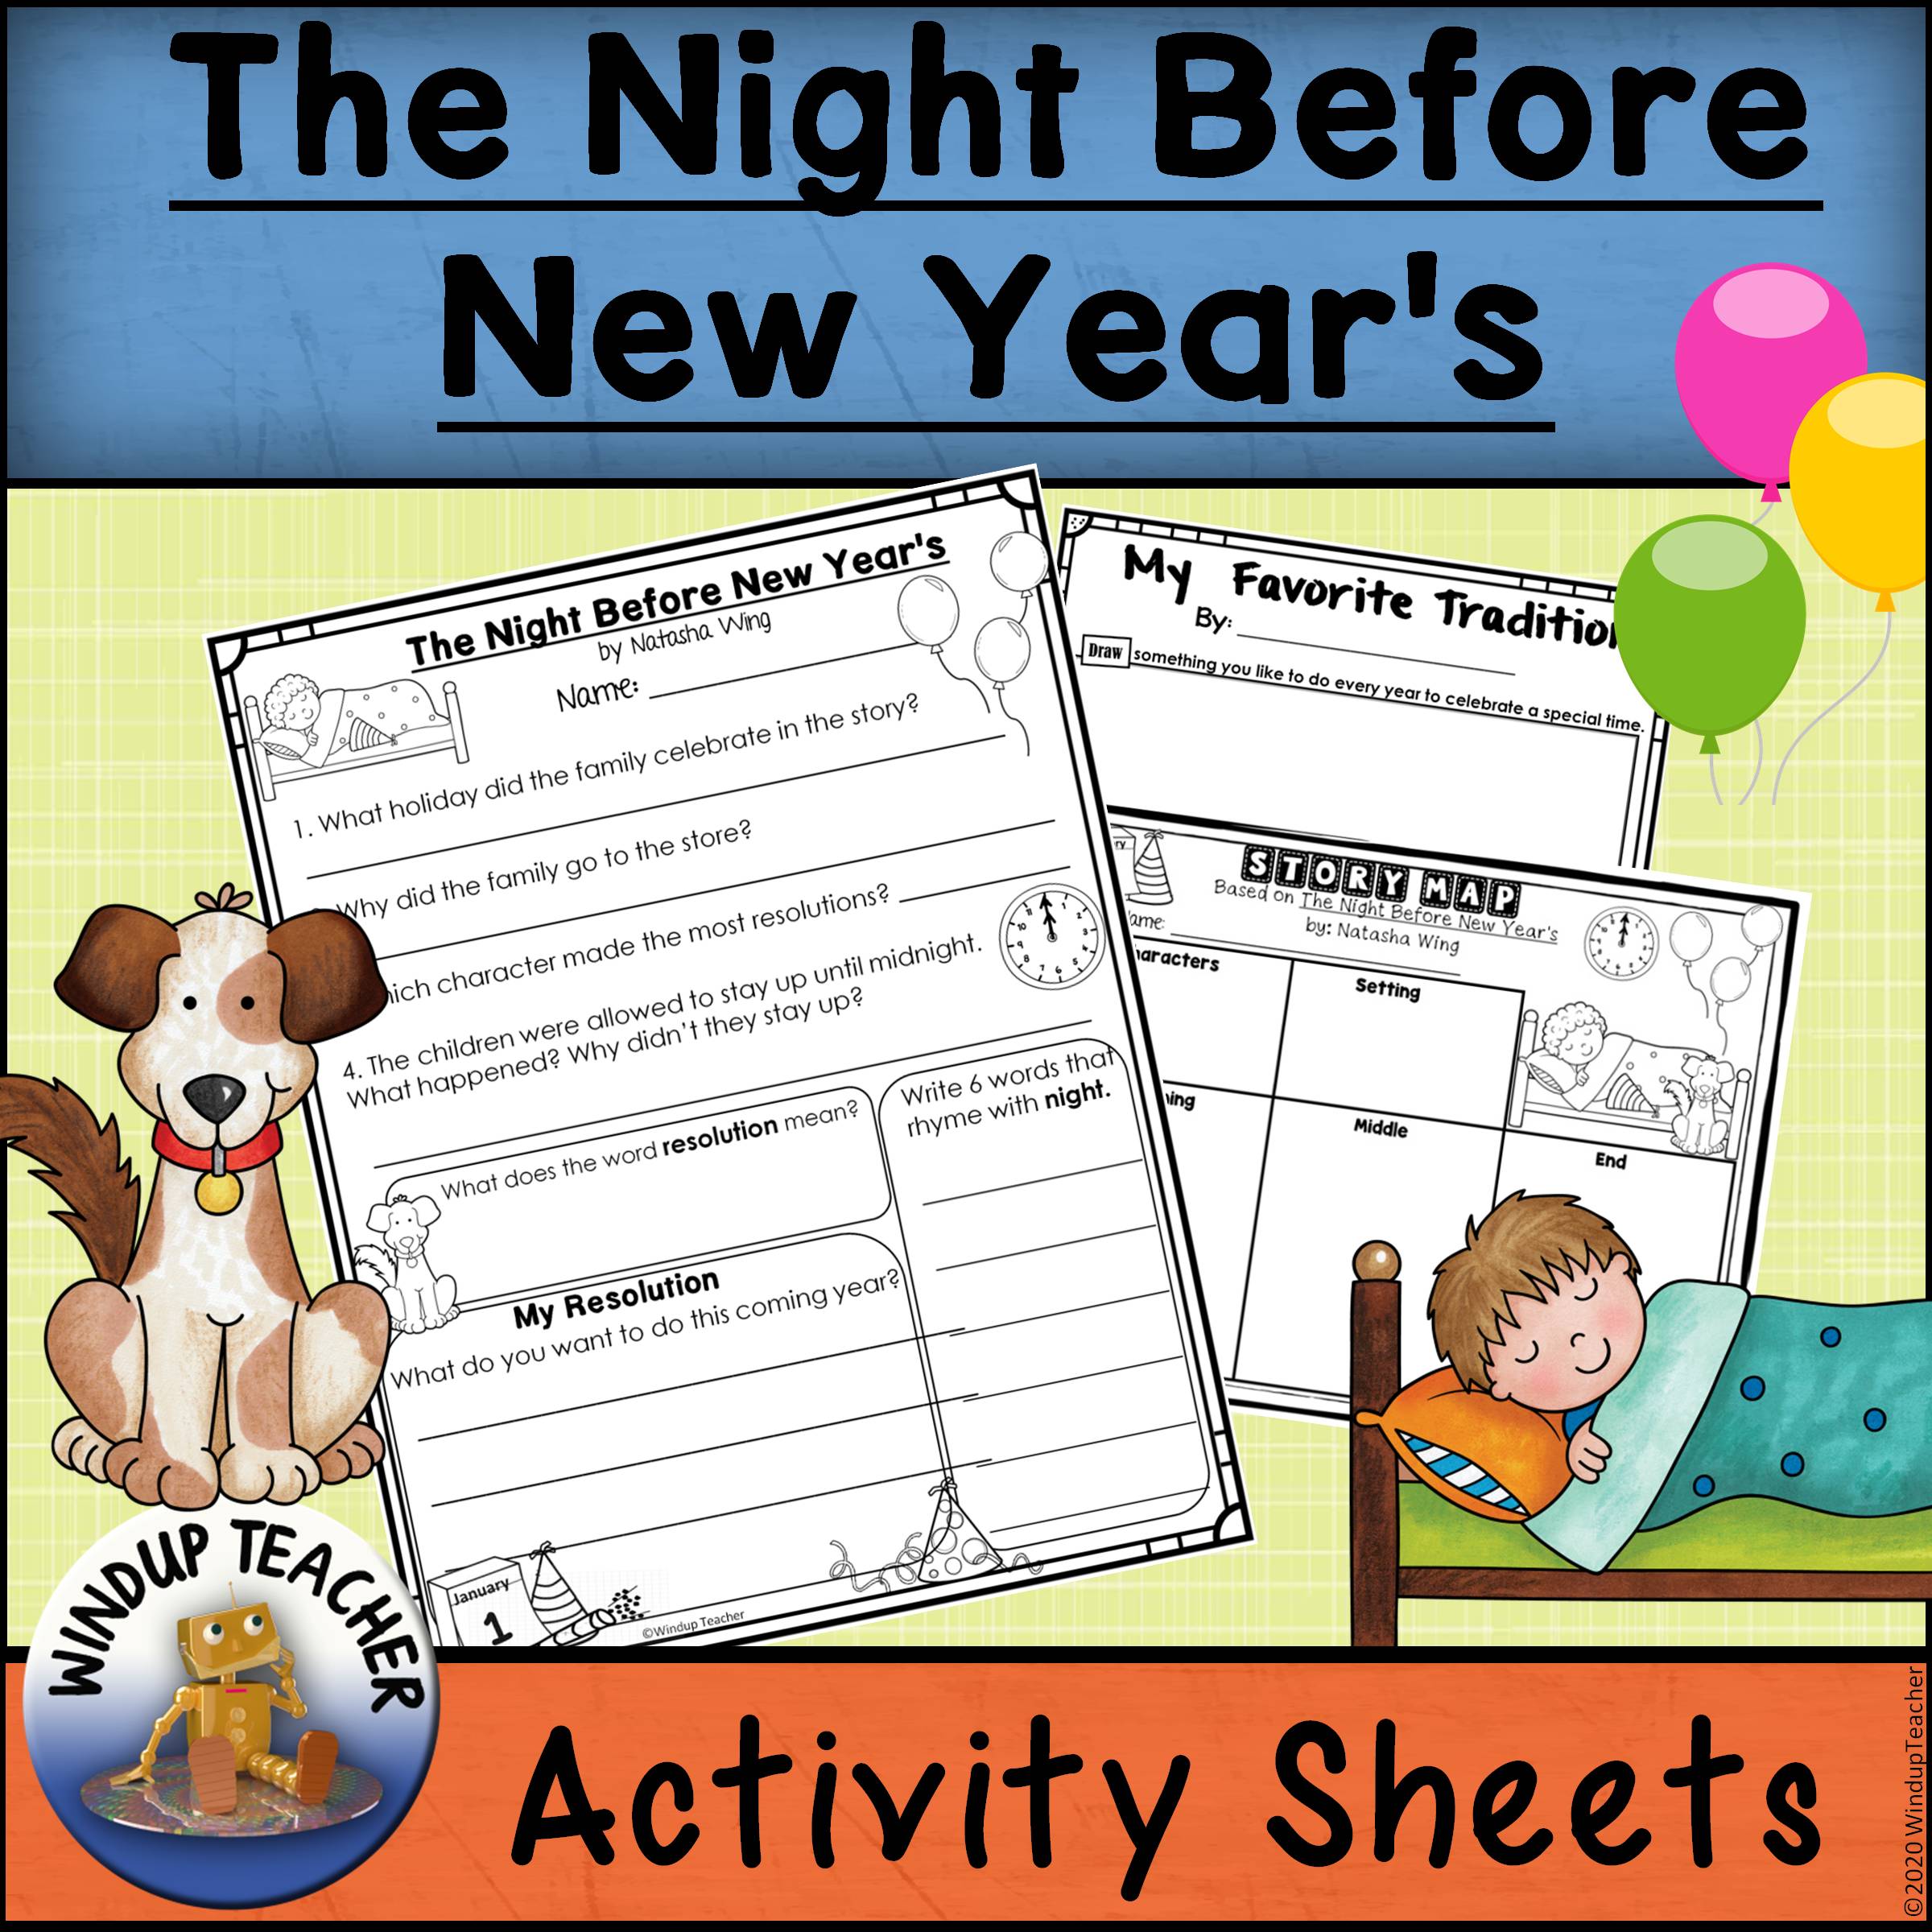 New years picture book activities bundle made by teachers